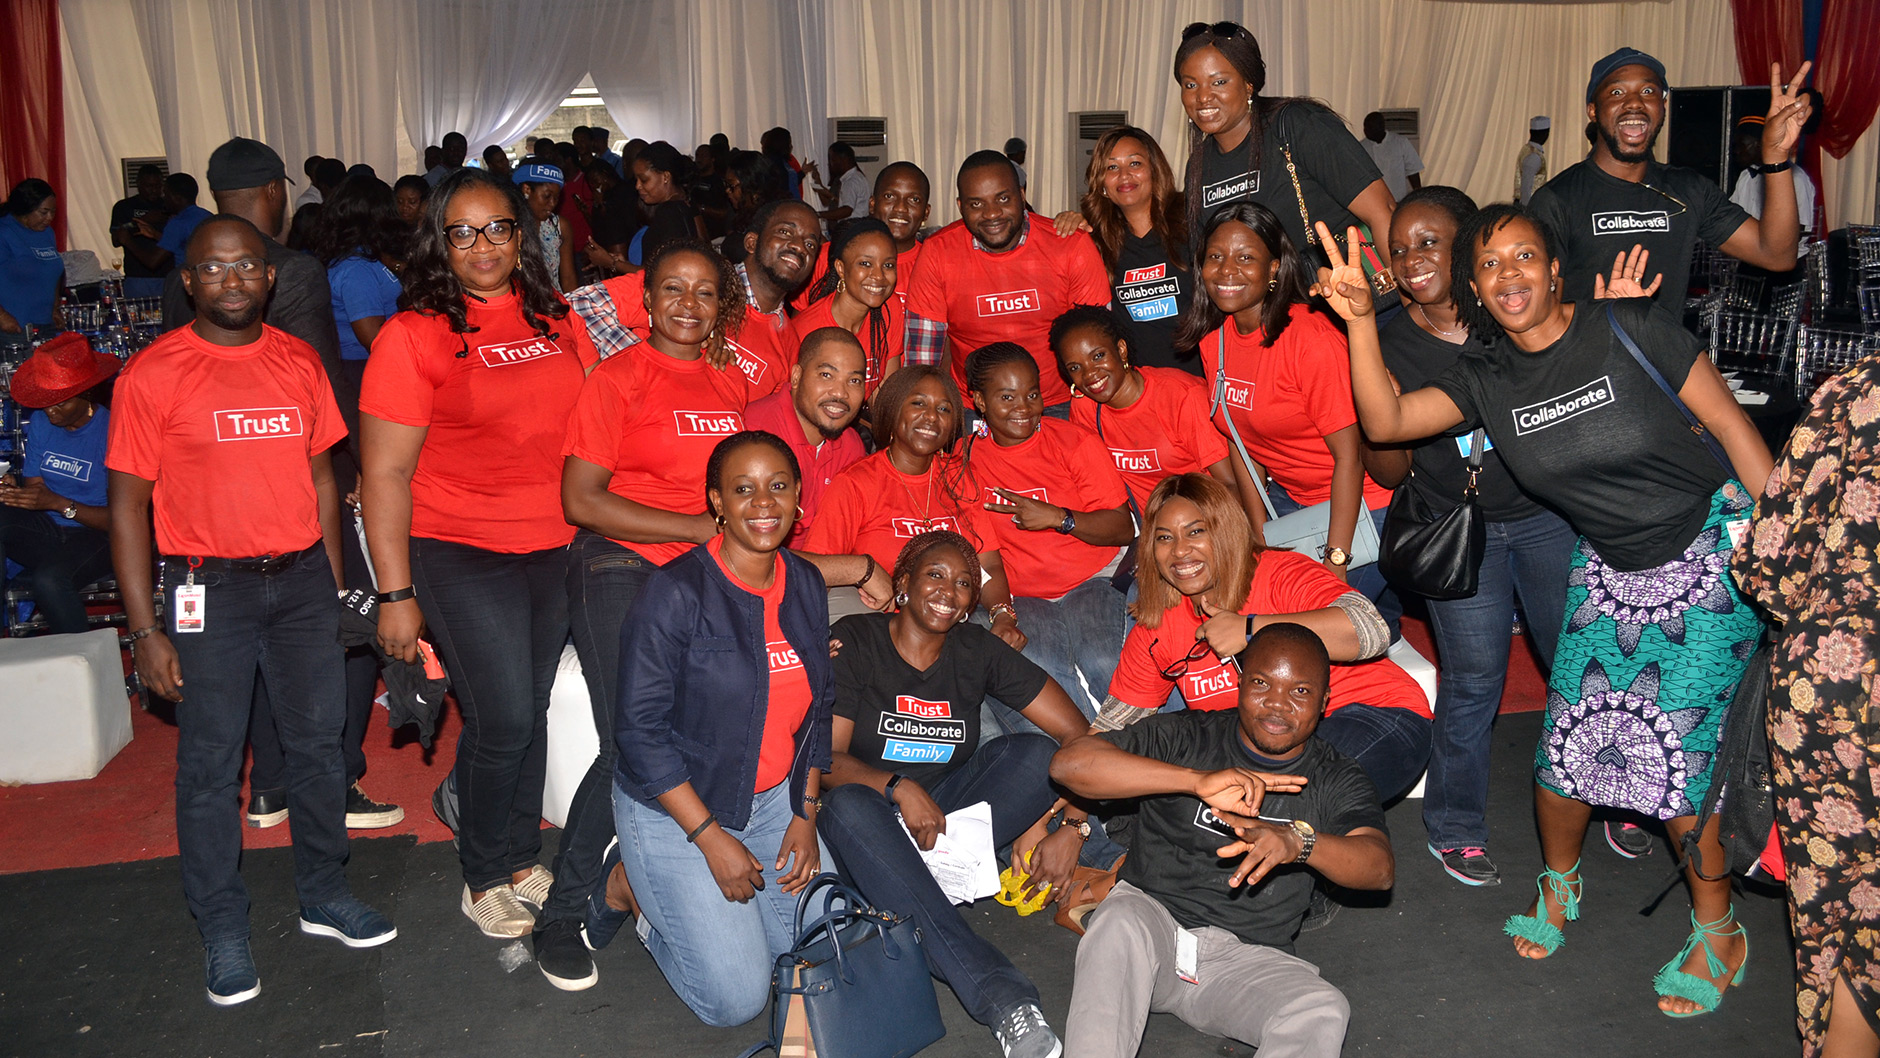 Attendees at the ExxonMobil Upstream keep calm and unwind event in Lagos.